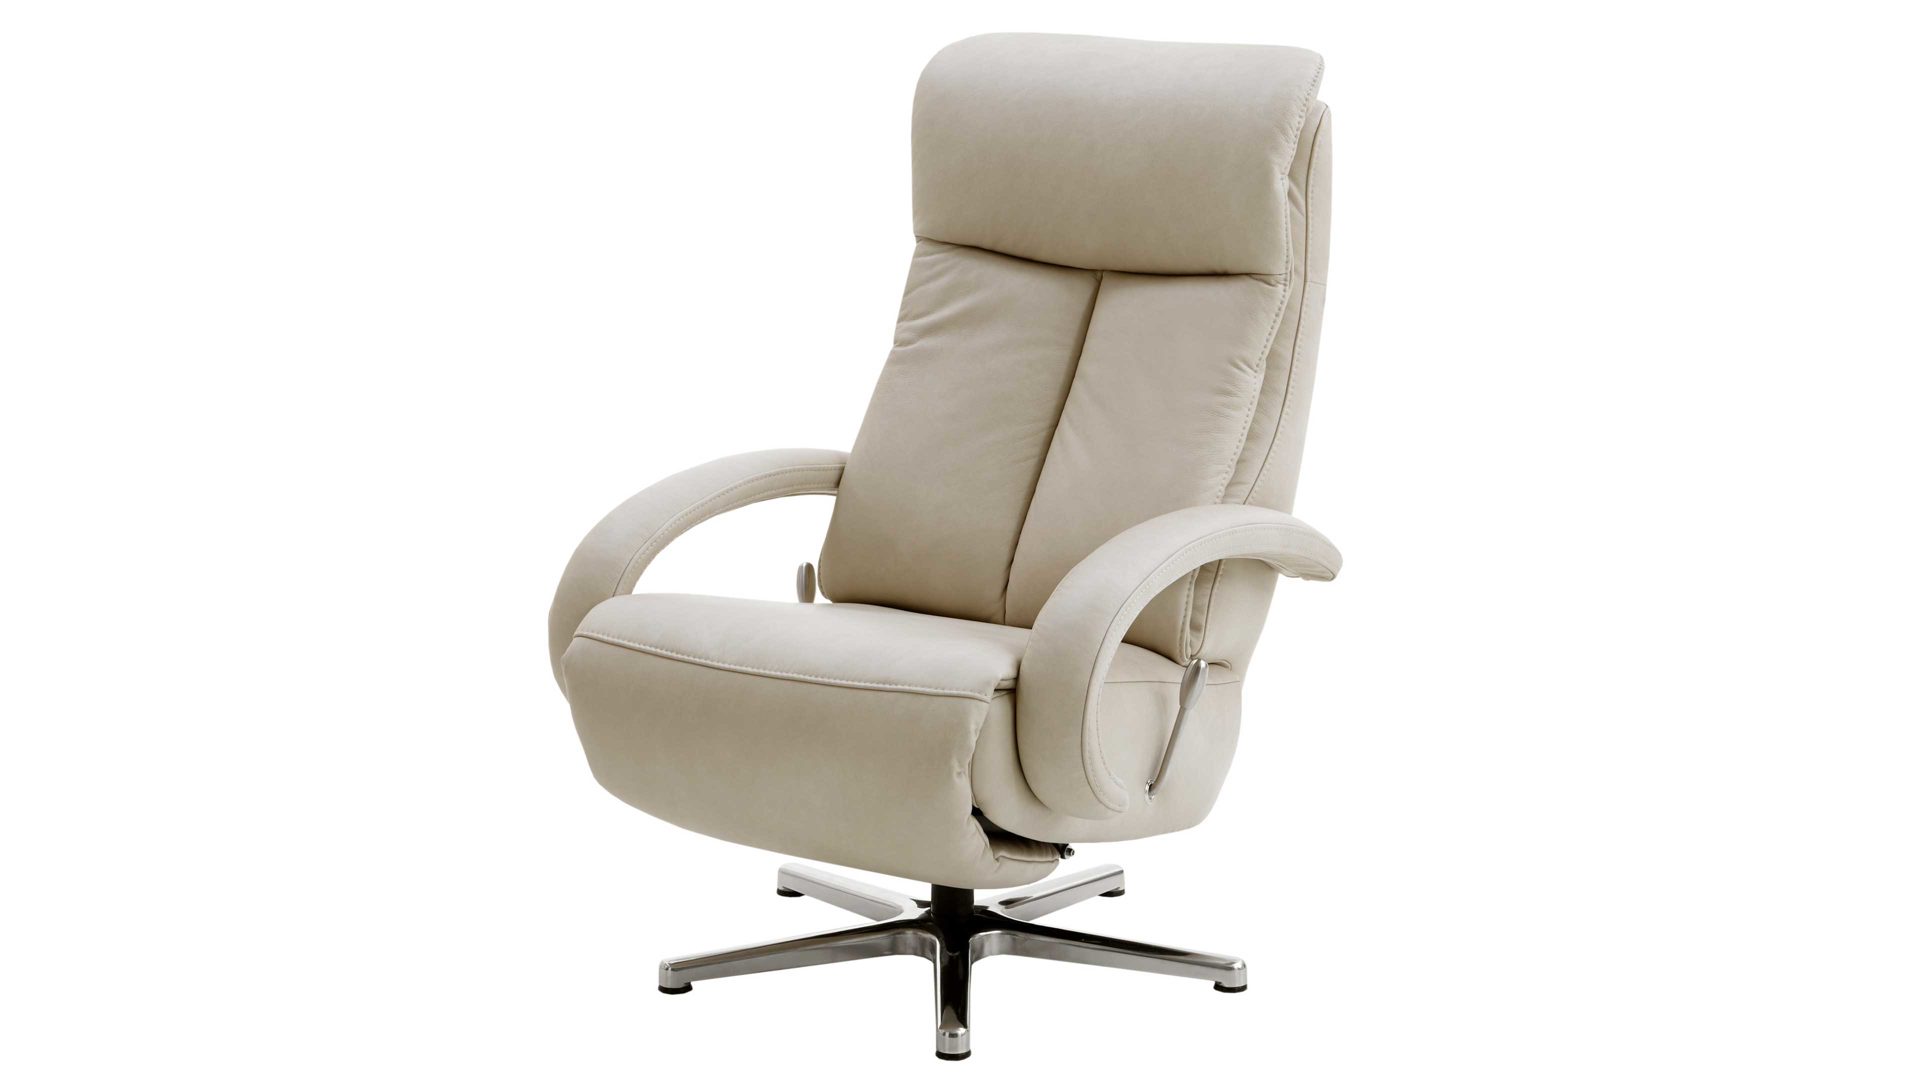 Comfortmaster CM-HU1030 - Relaxsessel C small bzw. Fernsehsessel, Lamstedt,  Cuxhaven, Bremerhaven